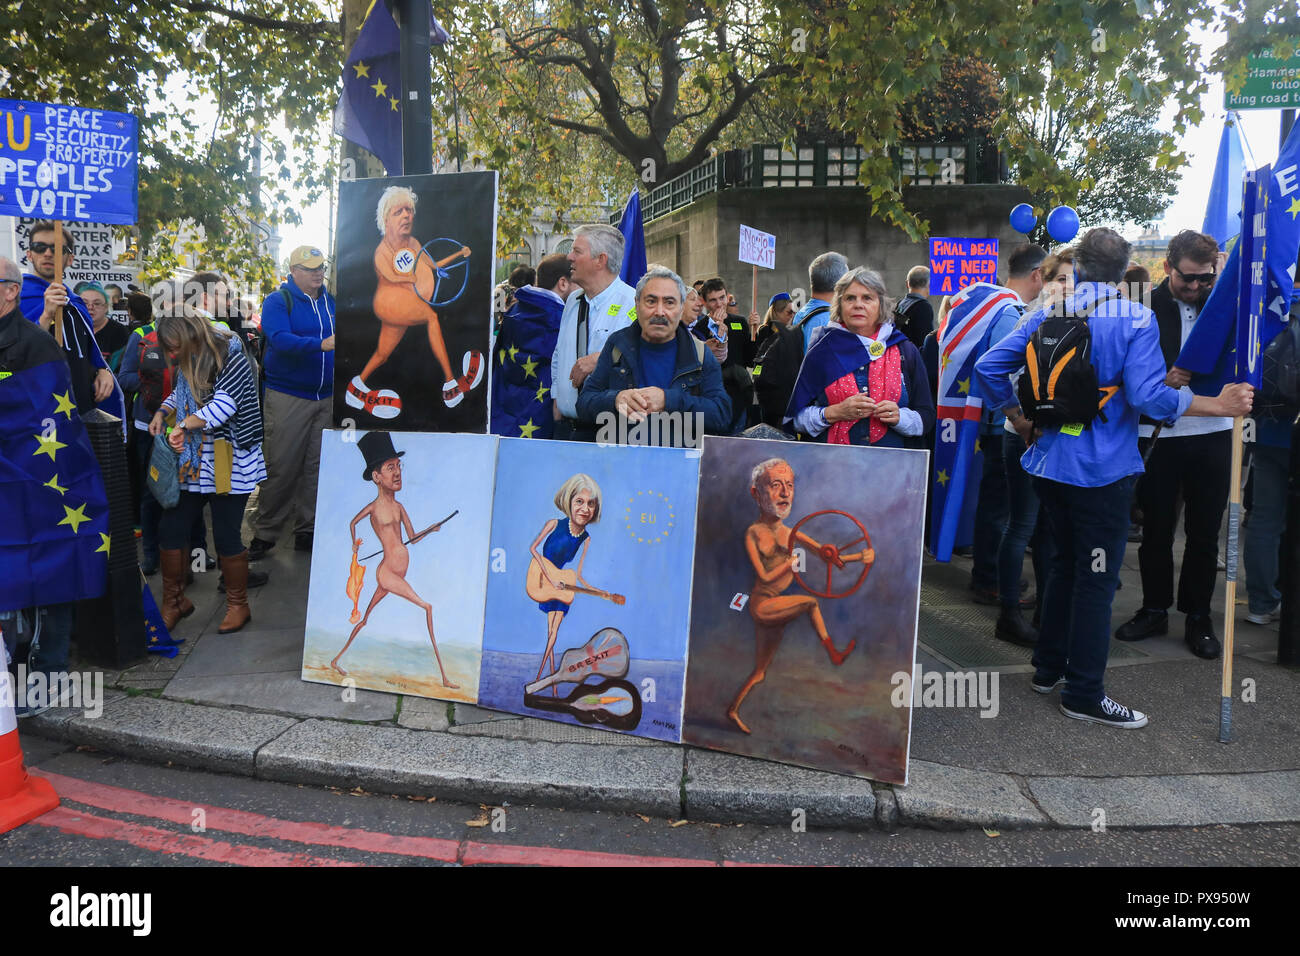 London UK. 20th October 2018. Thousands of Pro Europe campaigners marched through central London to Parliament demanding a vote on the final Brexit deal on Britain leaving European Union as more than 100,000 are expected at  the rally.Peoples Vote is a grassroots movement supported by European Movement UK, Open Britain, Britain for Europe and Scientists for EU. Credit: amer ghazzal/Alamy Live News Stock Photo